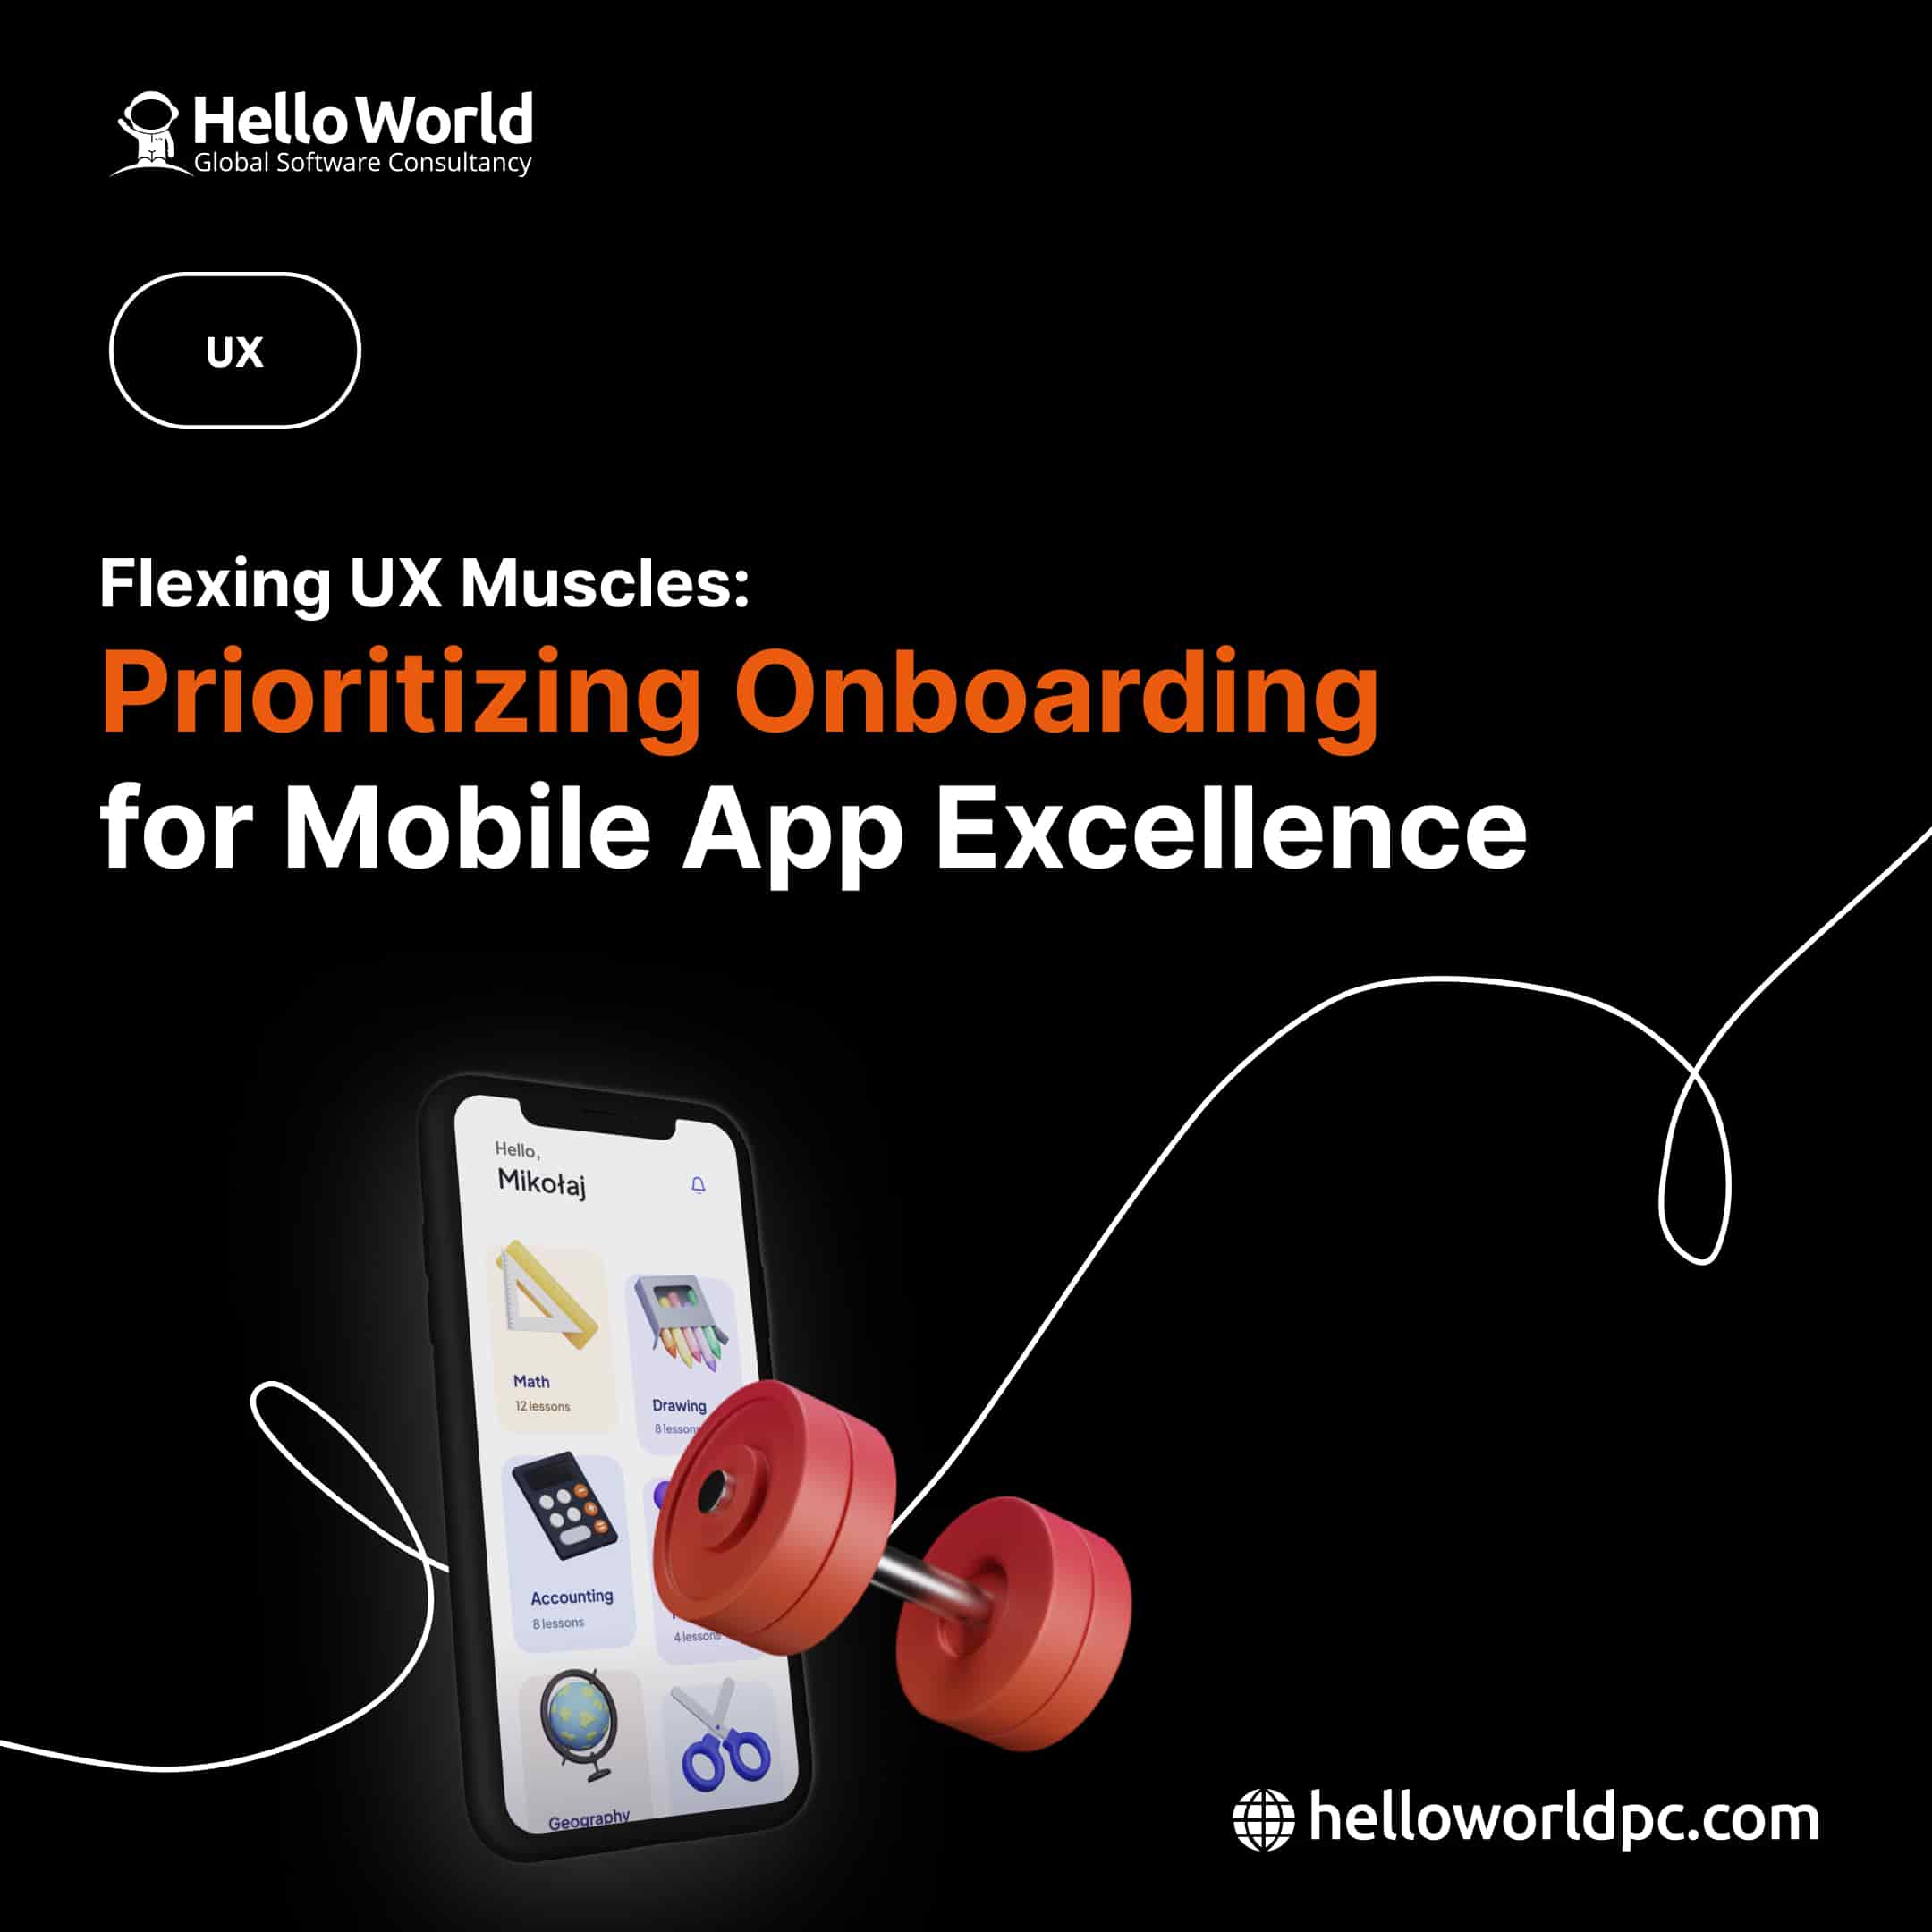 Flexing UX Muscles: Prioritizing Onboarding for Mobile App Excellence